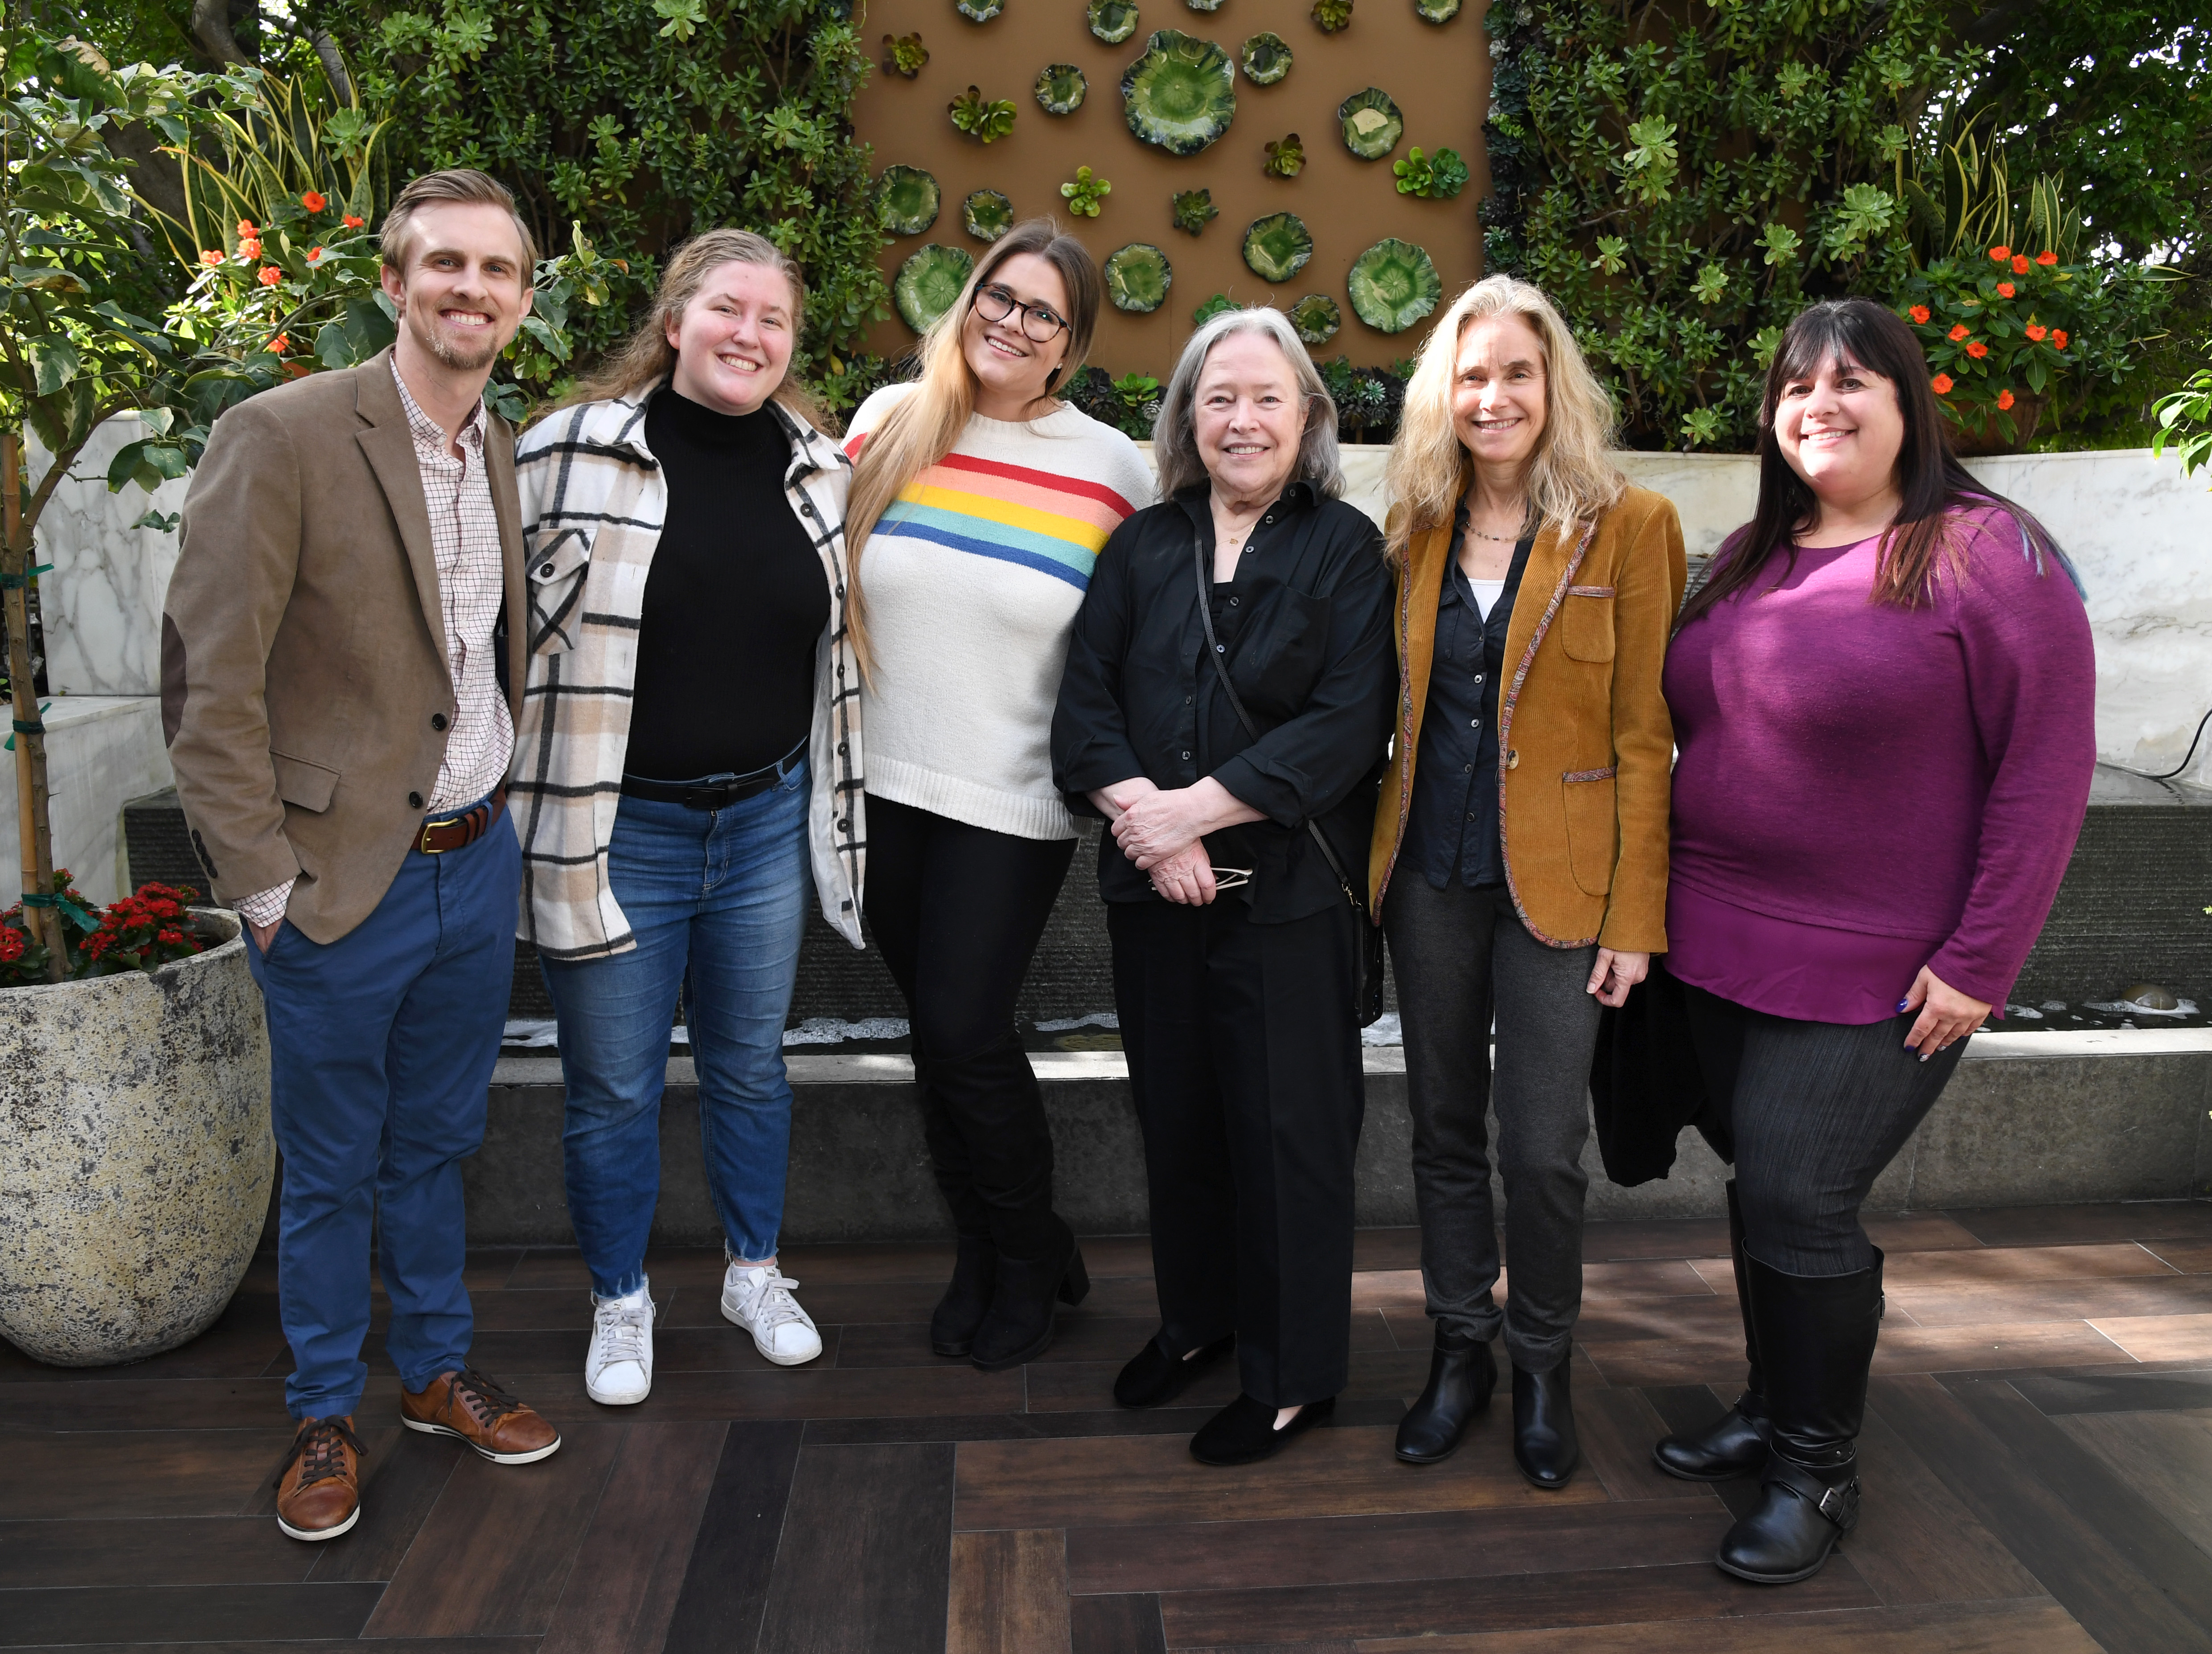 Colby Pines, Bonnie Weinzapfel, Ashley Wypick, Kathy Bates, Julie Ansell and Lisa Walder at the "Are You There God It's Me, Margaret." trailer launch event at Four Seasons Hotel Los Angeles on January 11, 2023 in Los Angeles, California | Source: Getty Images